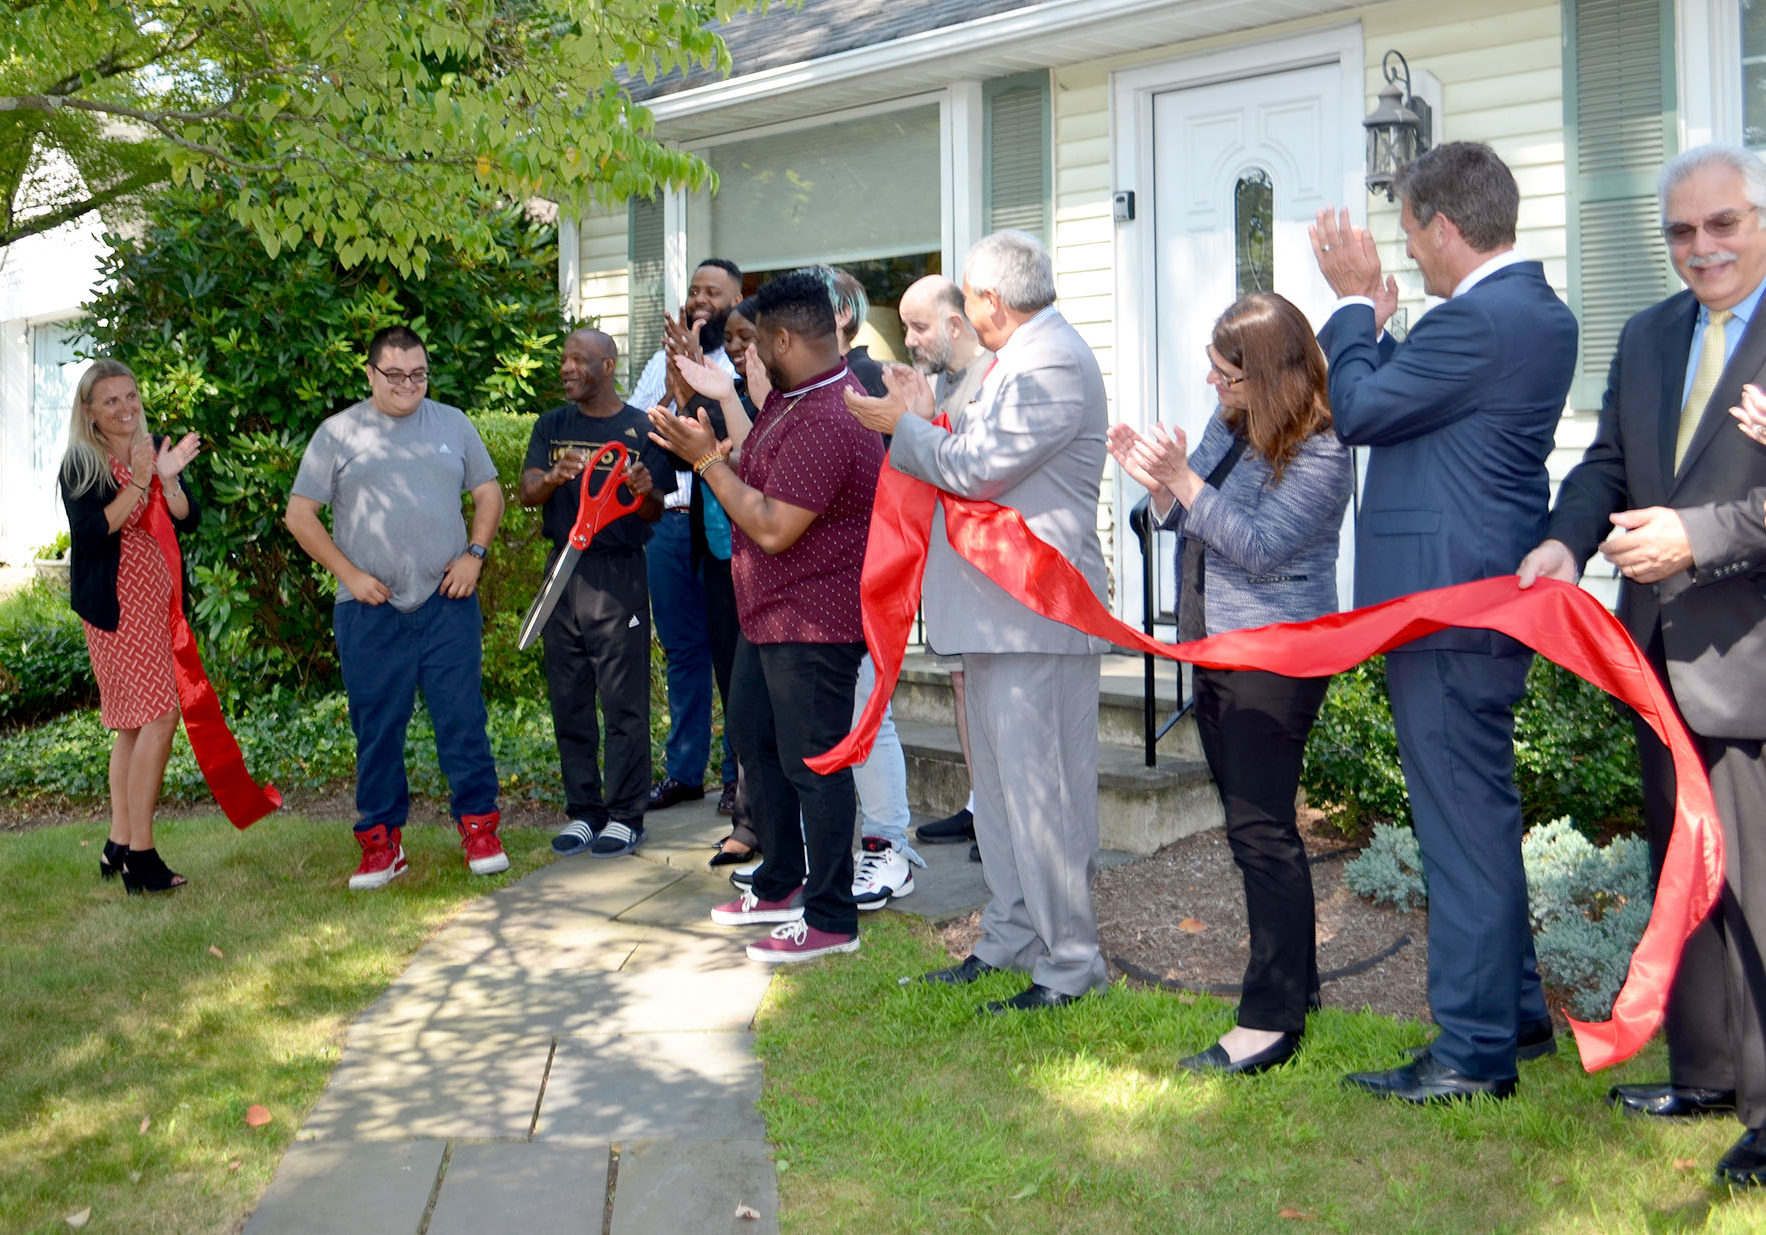 Community Options, Inc. of Mercer County celebrated the grand opening of a new home in Princeton, NJ with a ribbon cutting ceremony at 11 a.m.. Senator Kip Bateman, Assemblyman Andrew Zwicker, Mayor Liz Lempert and members of the Princeton Council as well as Board Members- Phyllis L. Marchand, Phil Lian, James Spano, were in attendance.